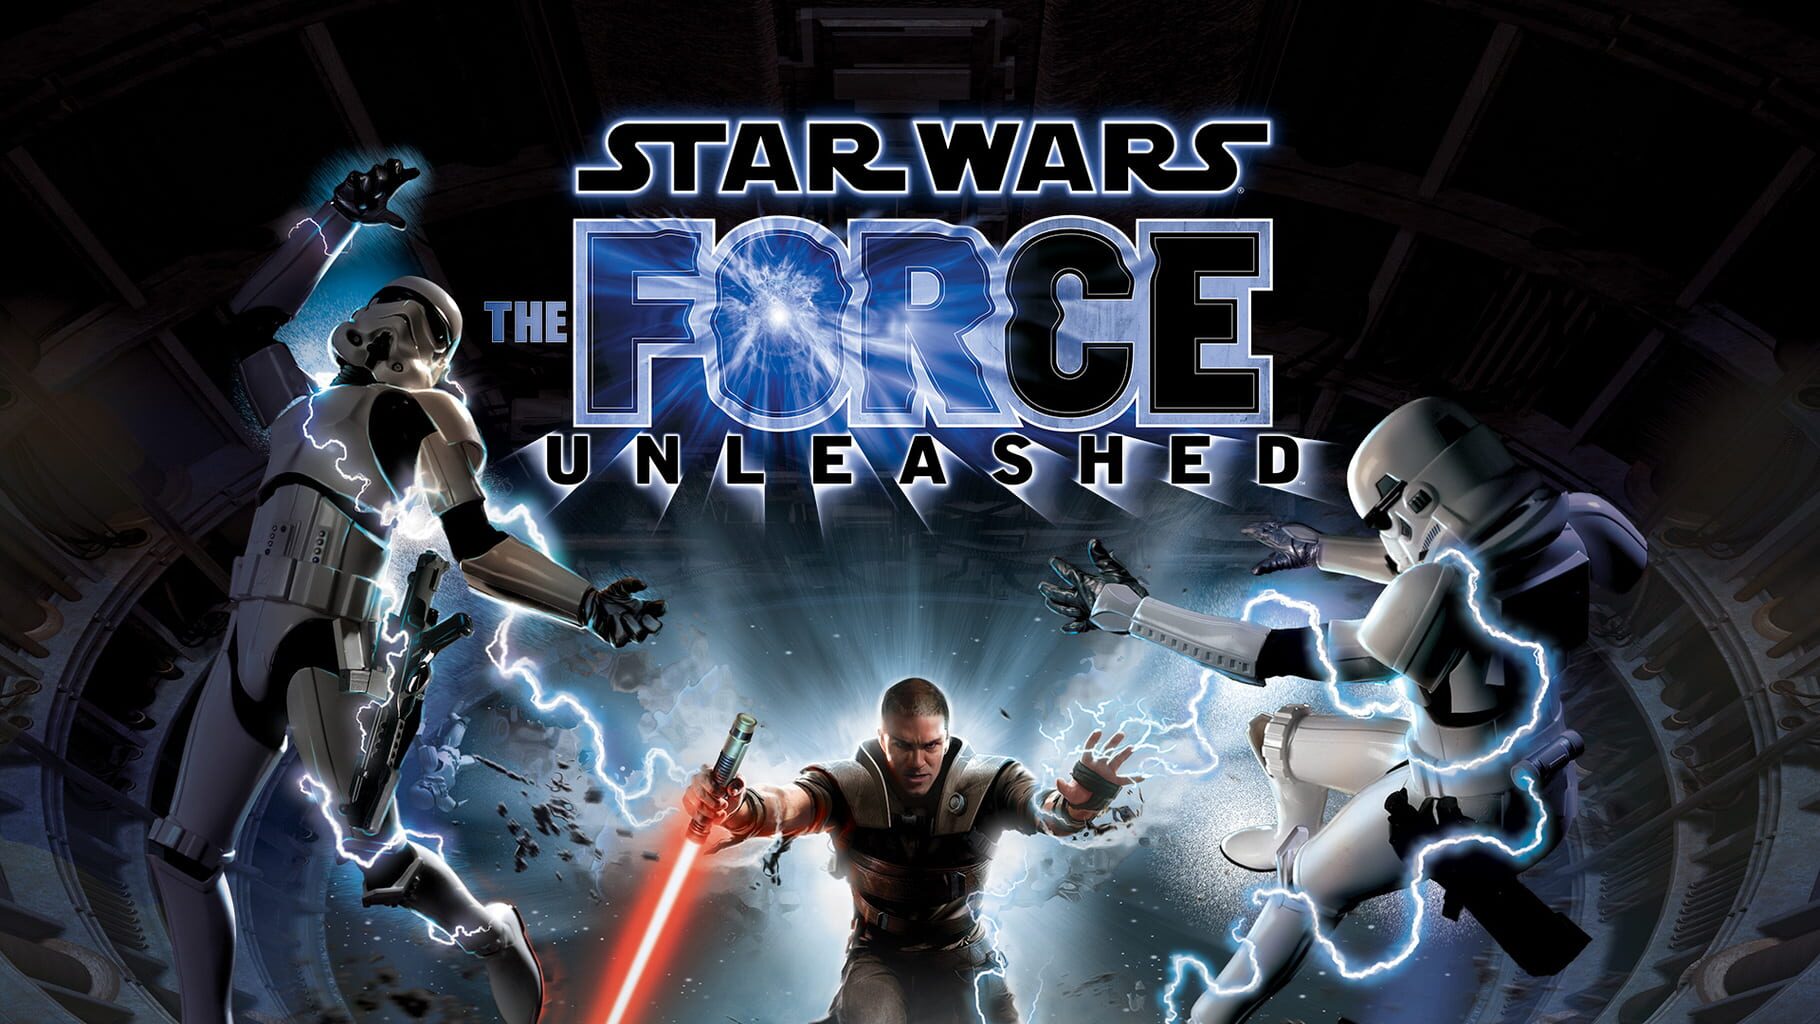 Arte - Star Wars: The Force Unleashed